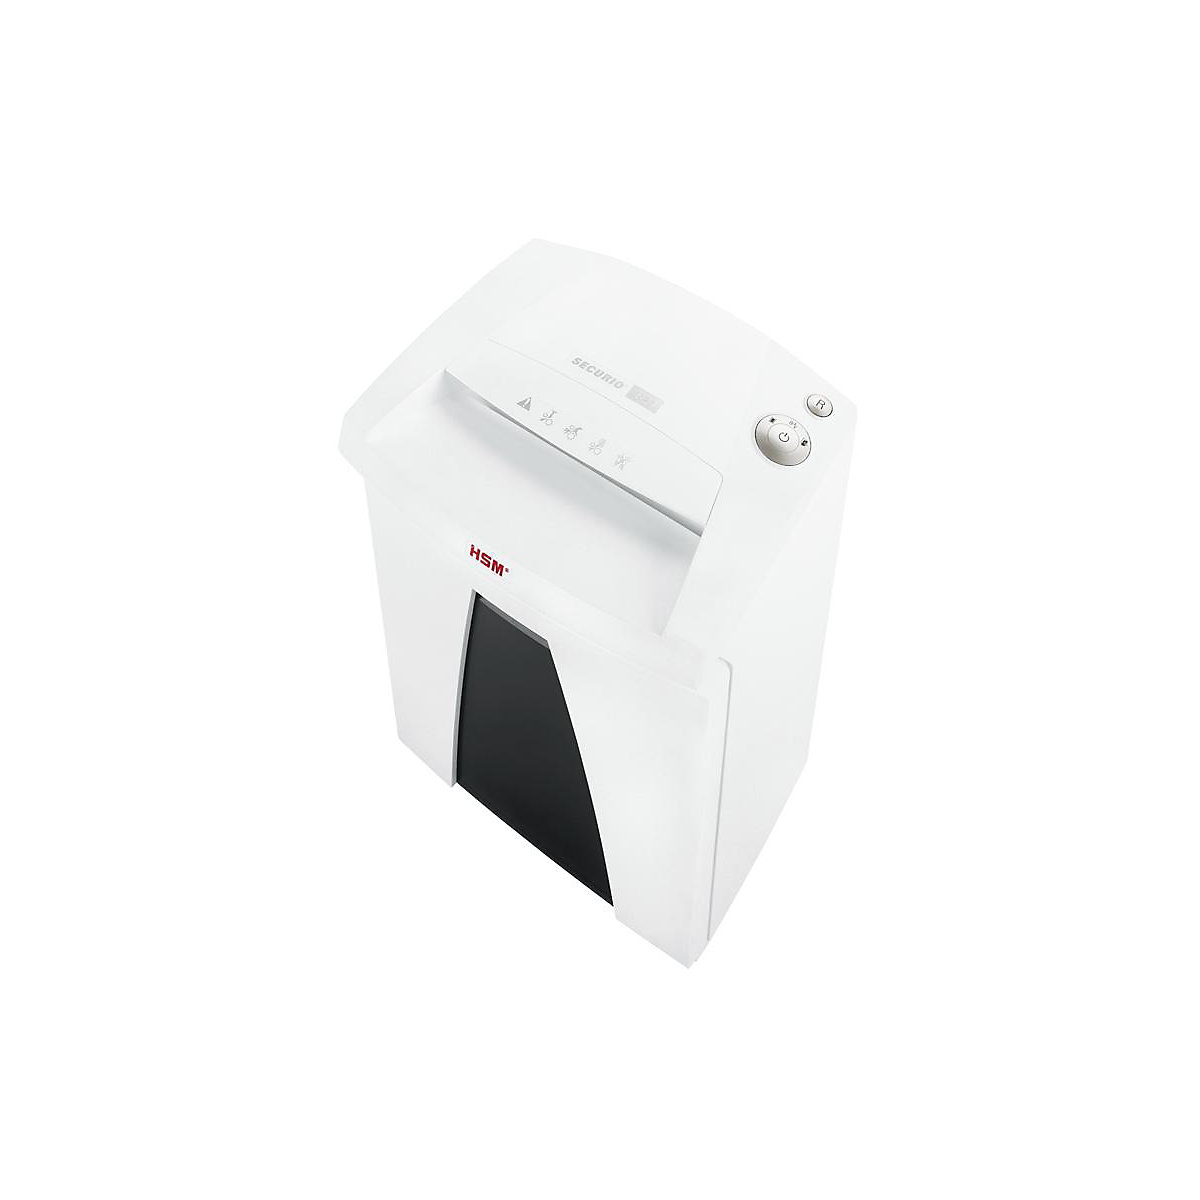 HSM – SECURIO document shredder B24, collection capacity 34 l, particles, 4 sheets